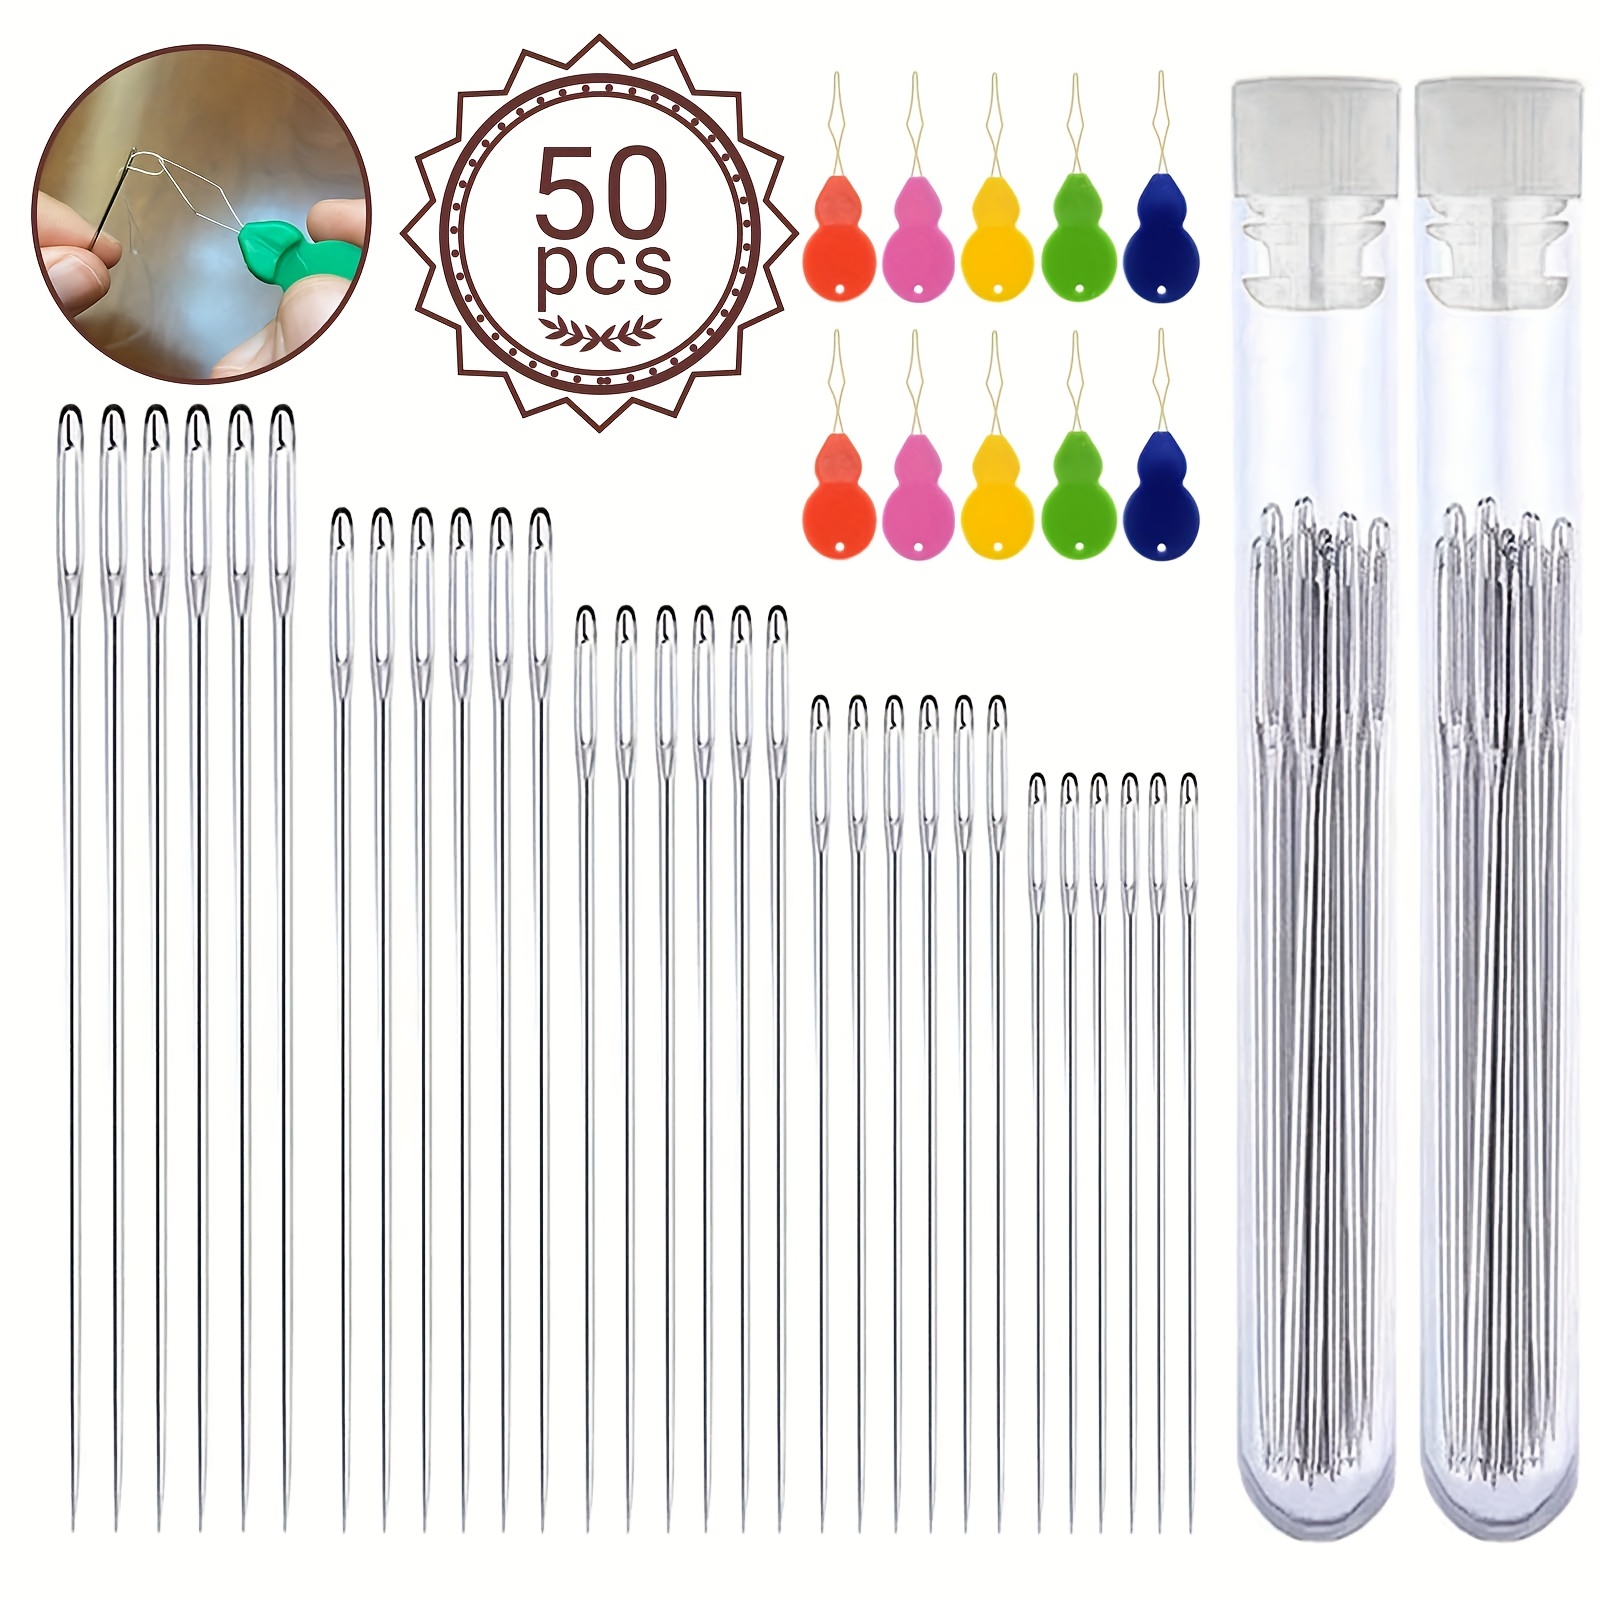 25pcs Large Eye Sewing Needles, 5 Sizes Tapestry Needle Embroidery Needles  Yarn Needles Quilting Needles with Wooden Needle Case Stainless Steel Wool